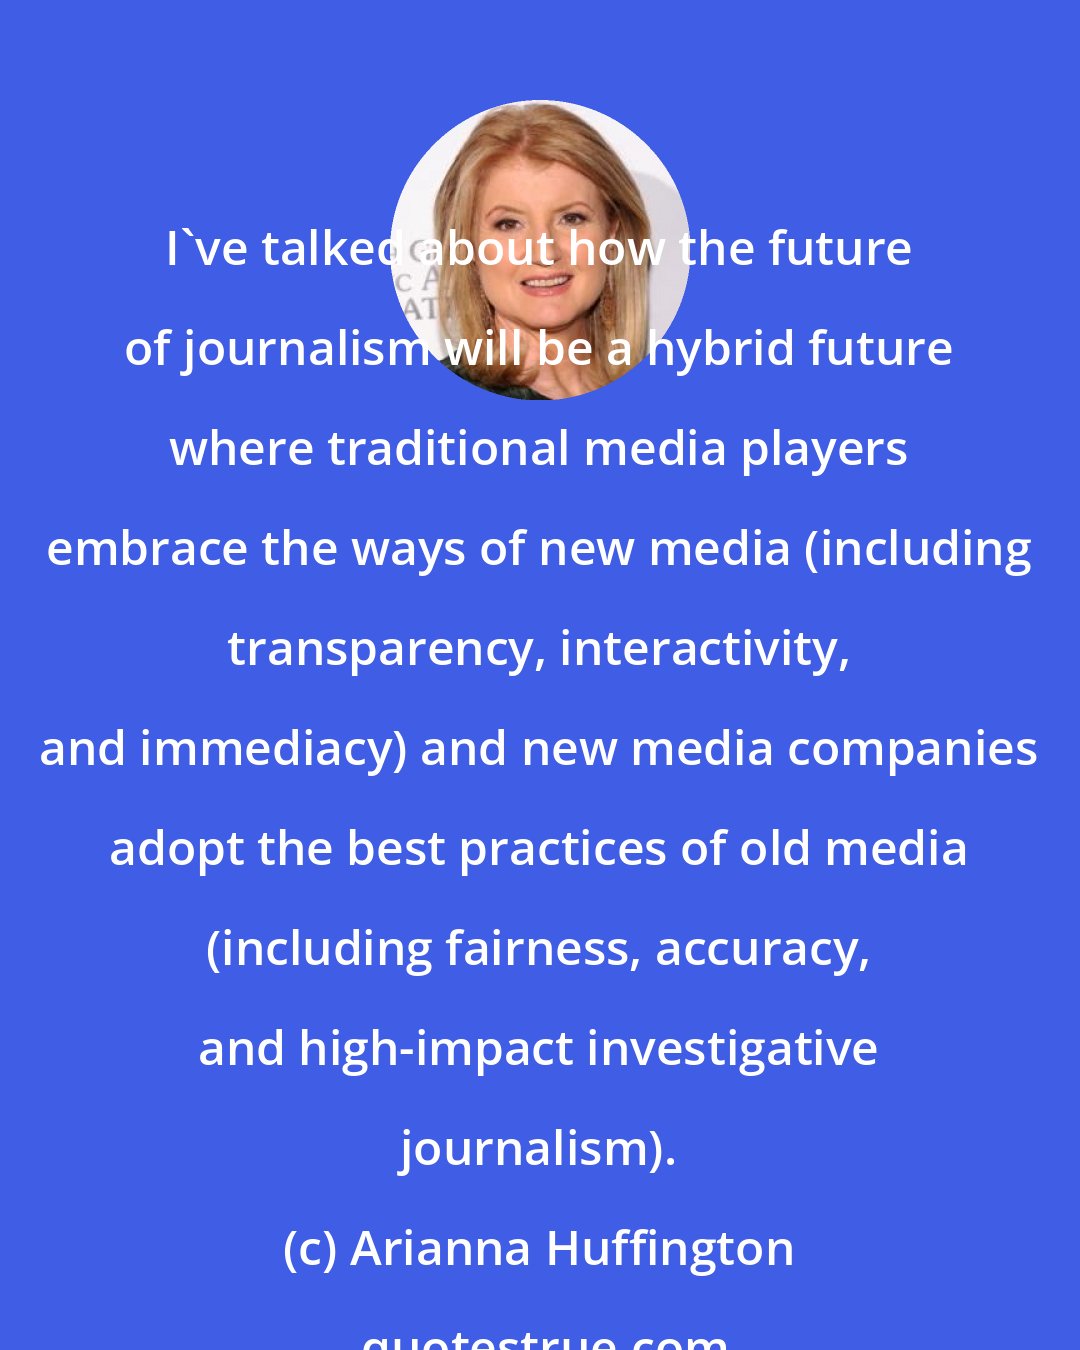 Arianna Huffington: I've talked about how the future of journalism will be a hybrid future where traditional media players embrace the ways of new media (including transparency, interactivity, and immediacy) and new media companies adopt the best practices of old media (including fairness, accuracy, and high-impact investigative journalism).